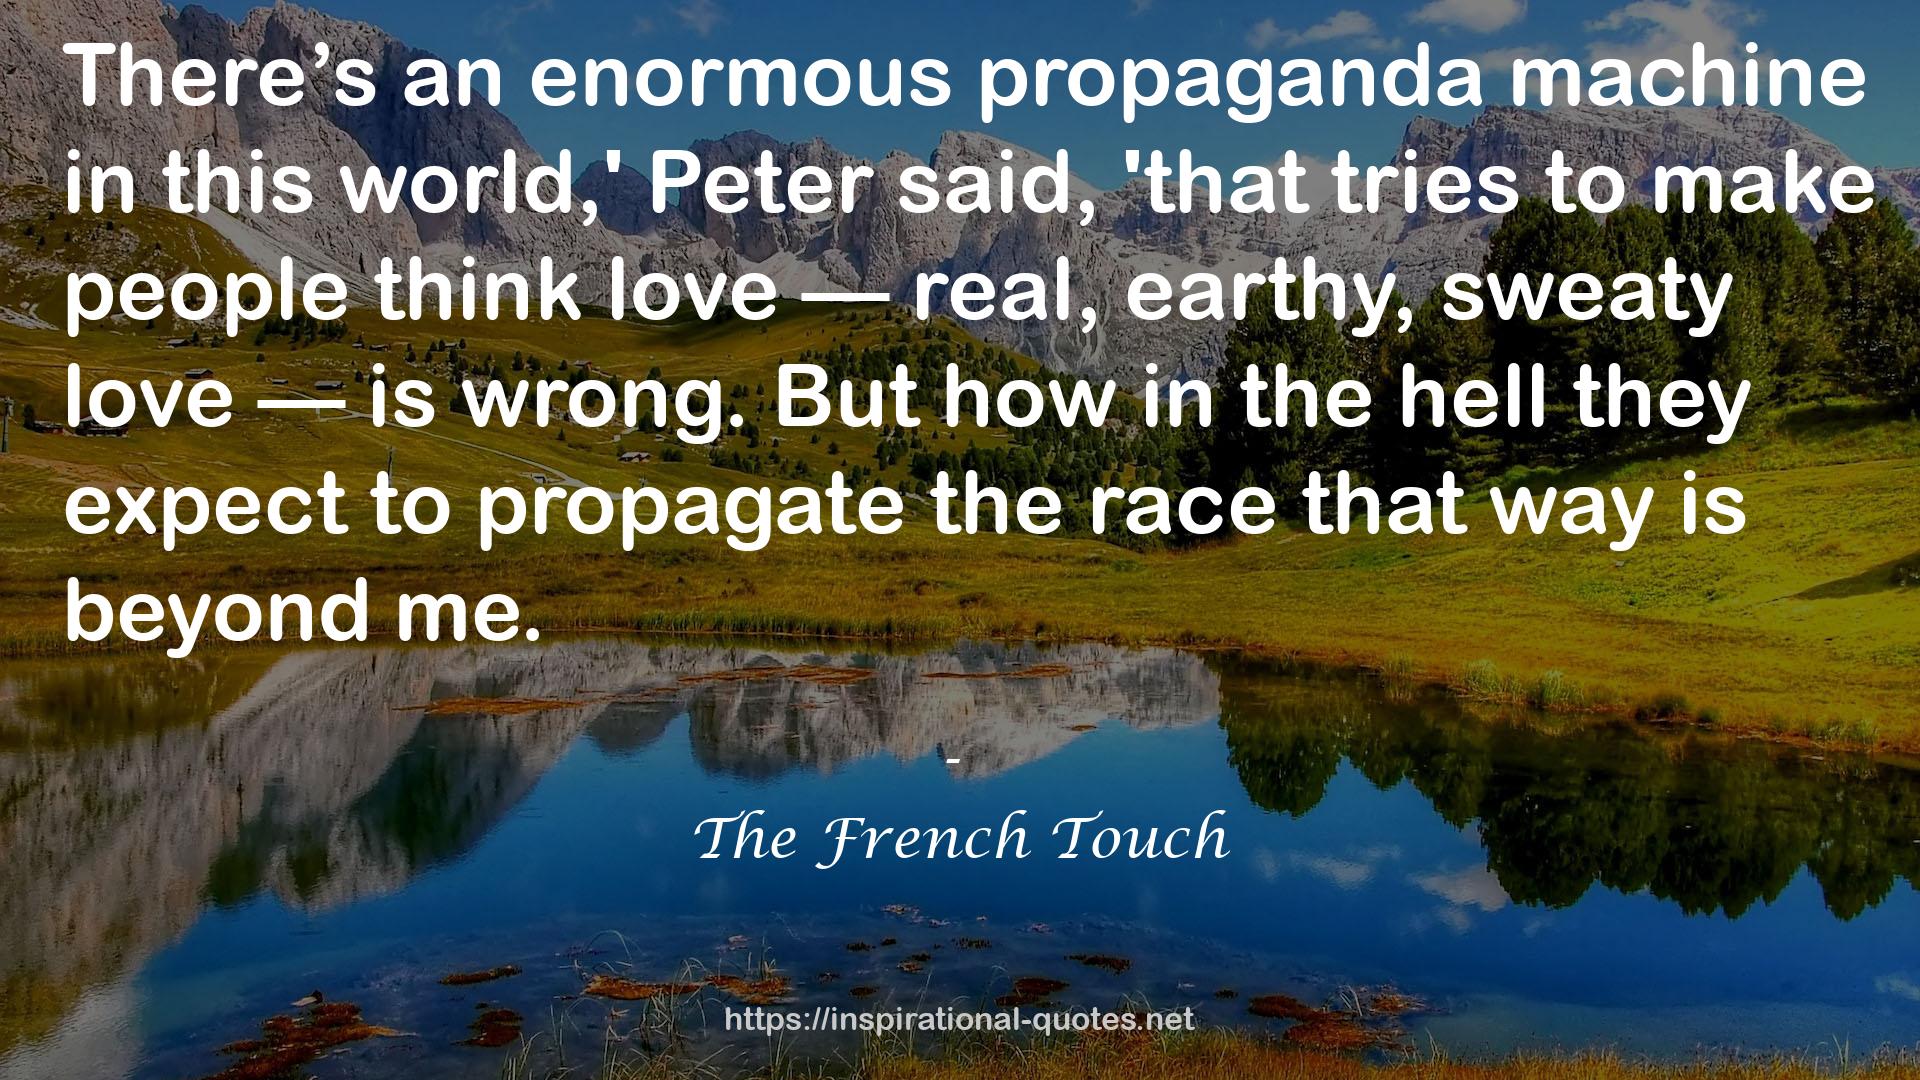 The French Touch QUOTES